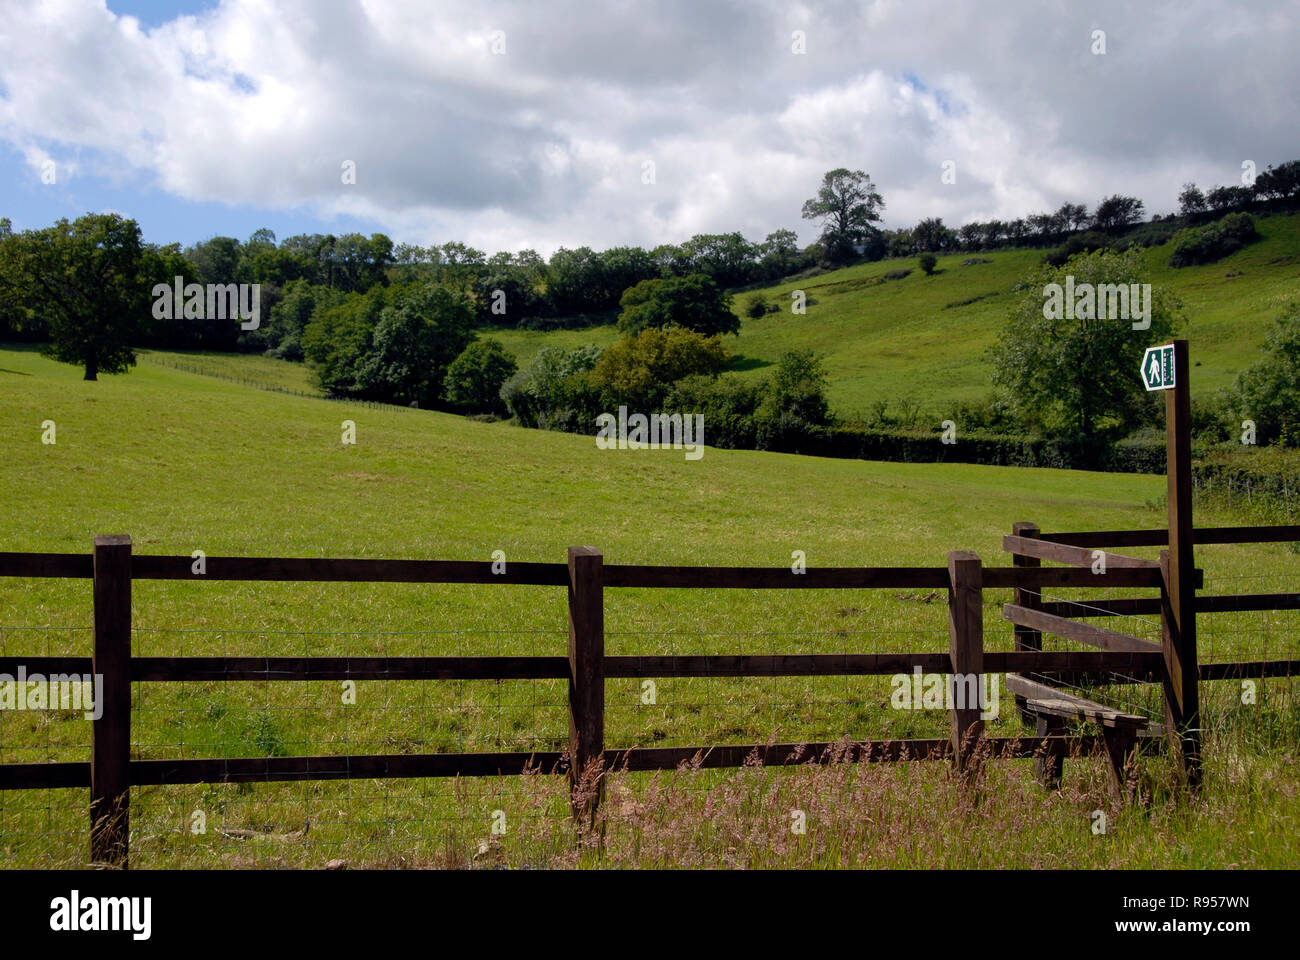 Wooden fence with stile by signpost indicating public footpath over field Stock Photo